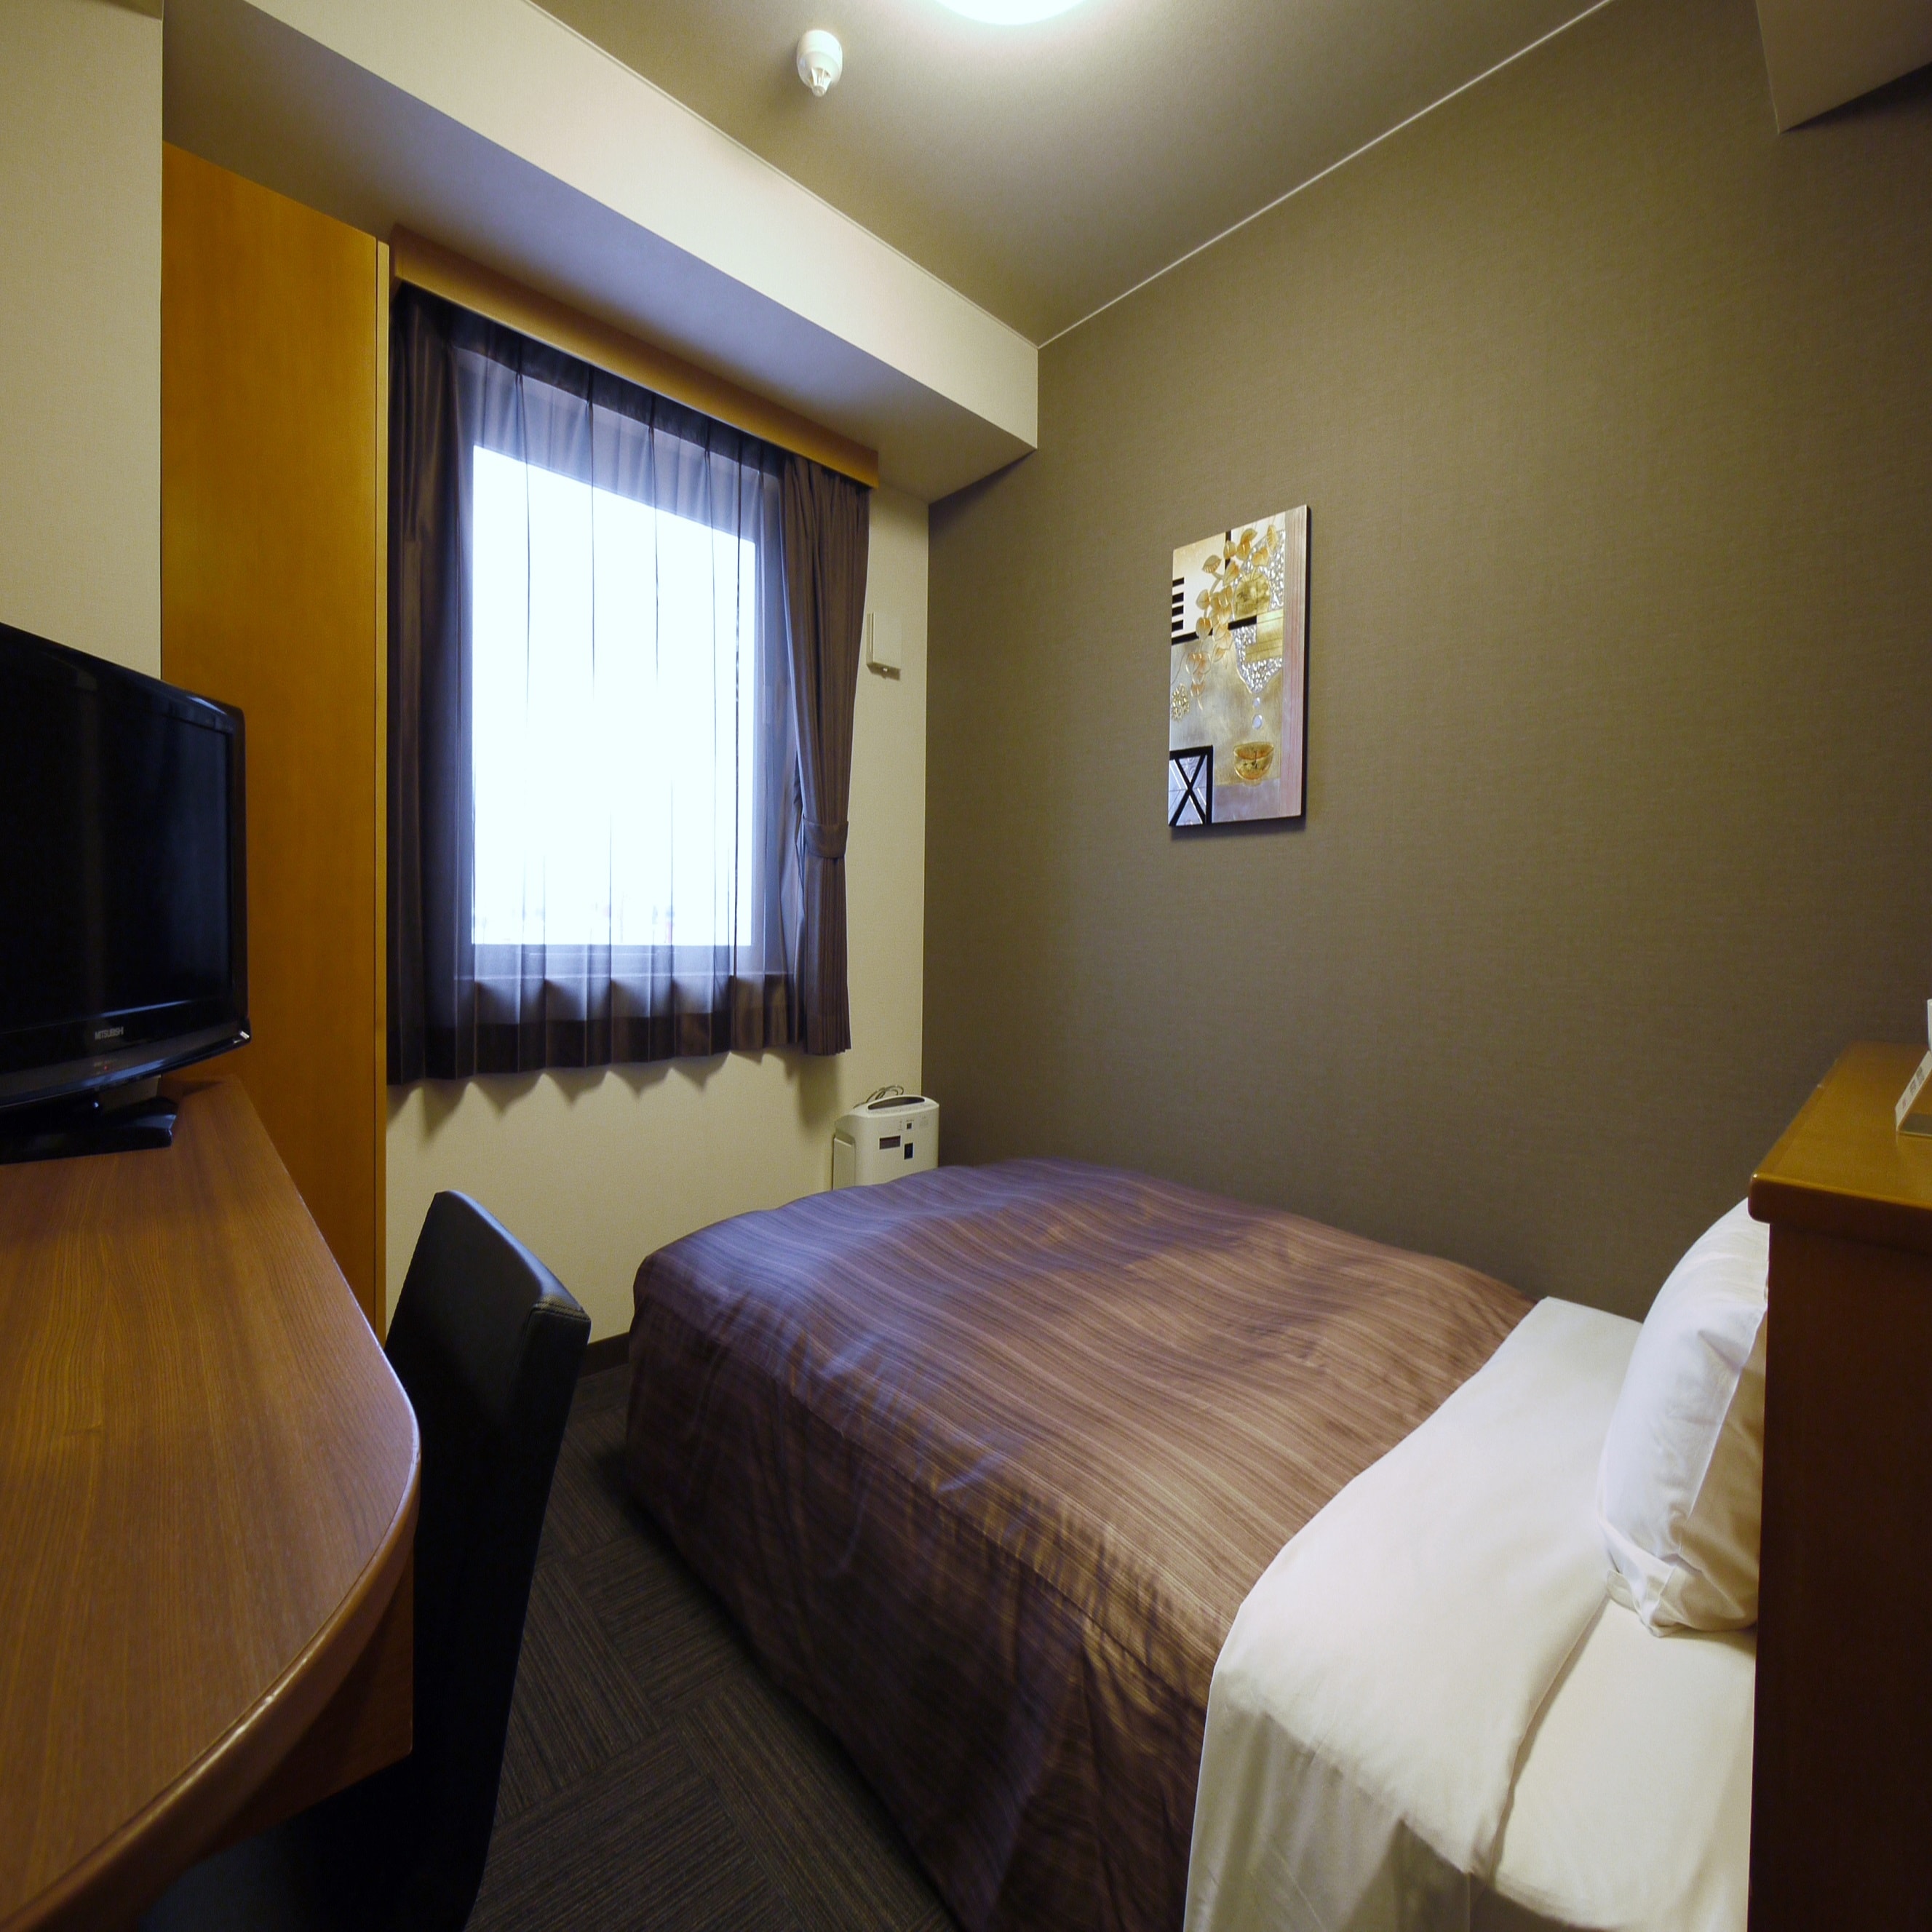 ■ Standard single room ■ Bright, simple, clean and calm atmosphere.